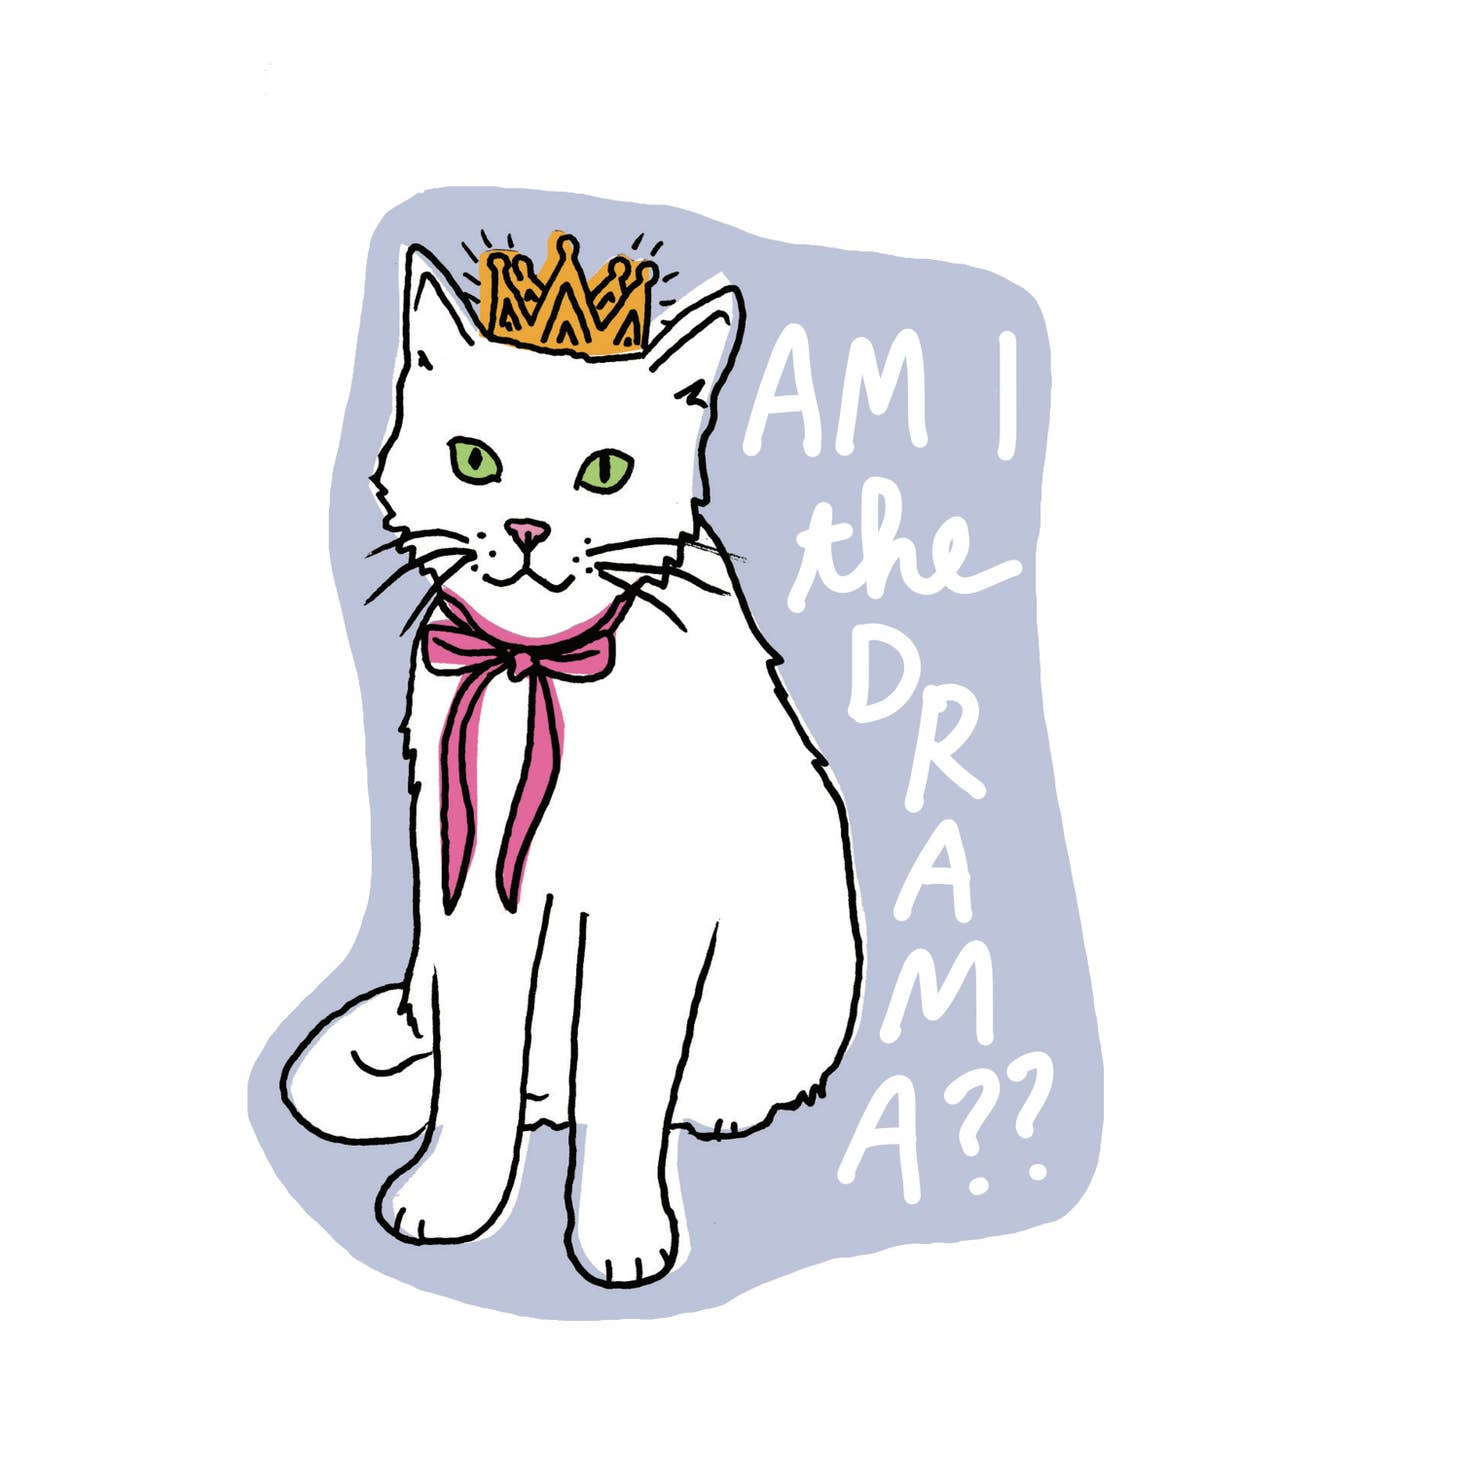 Grey background with image of white cat wearing a gold crown and pink bow with white text says, "Am I the drama??".